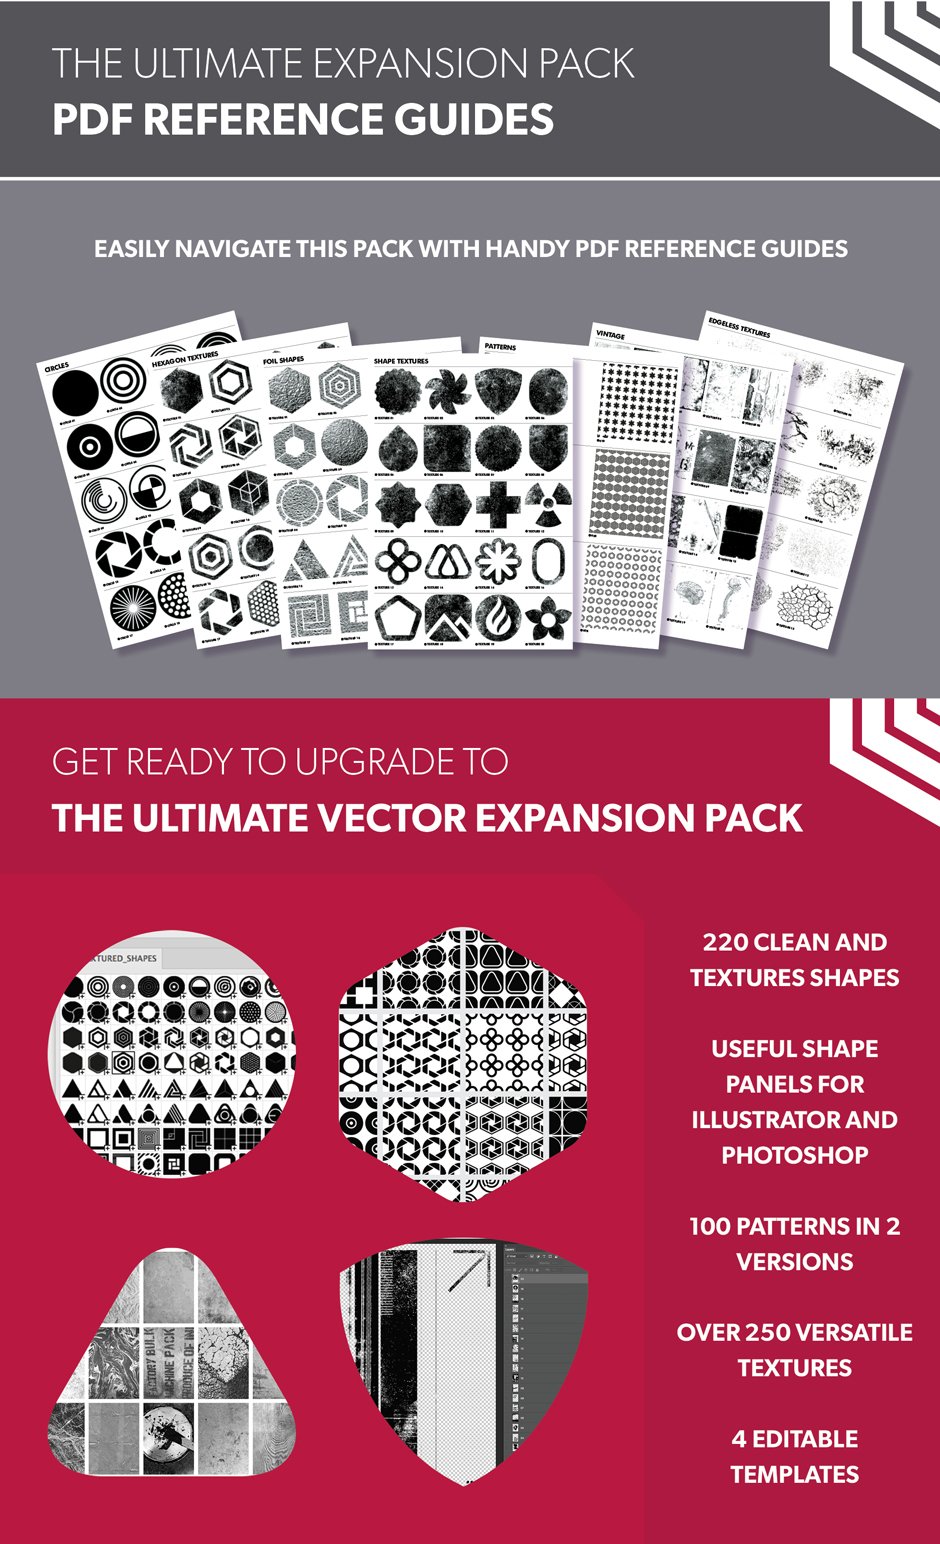 The Ultimate Vector Expansion Pack